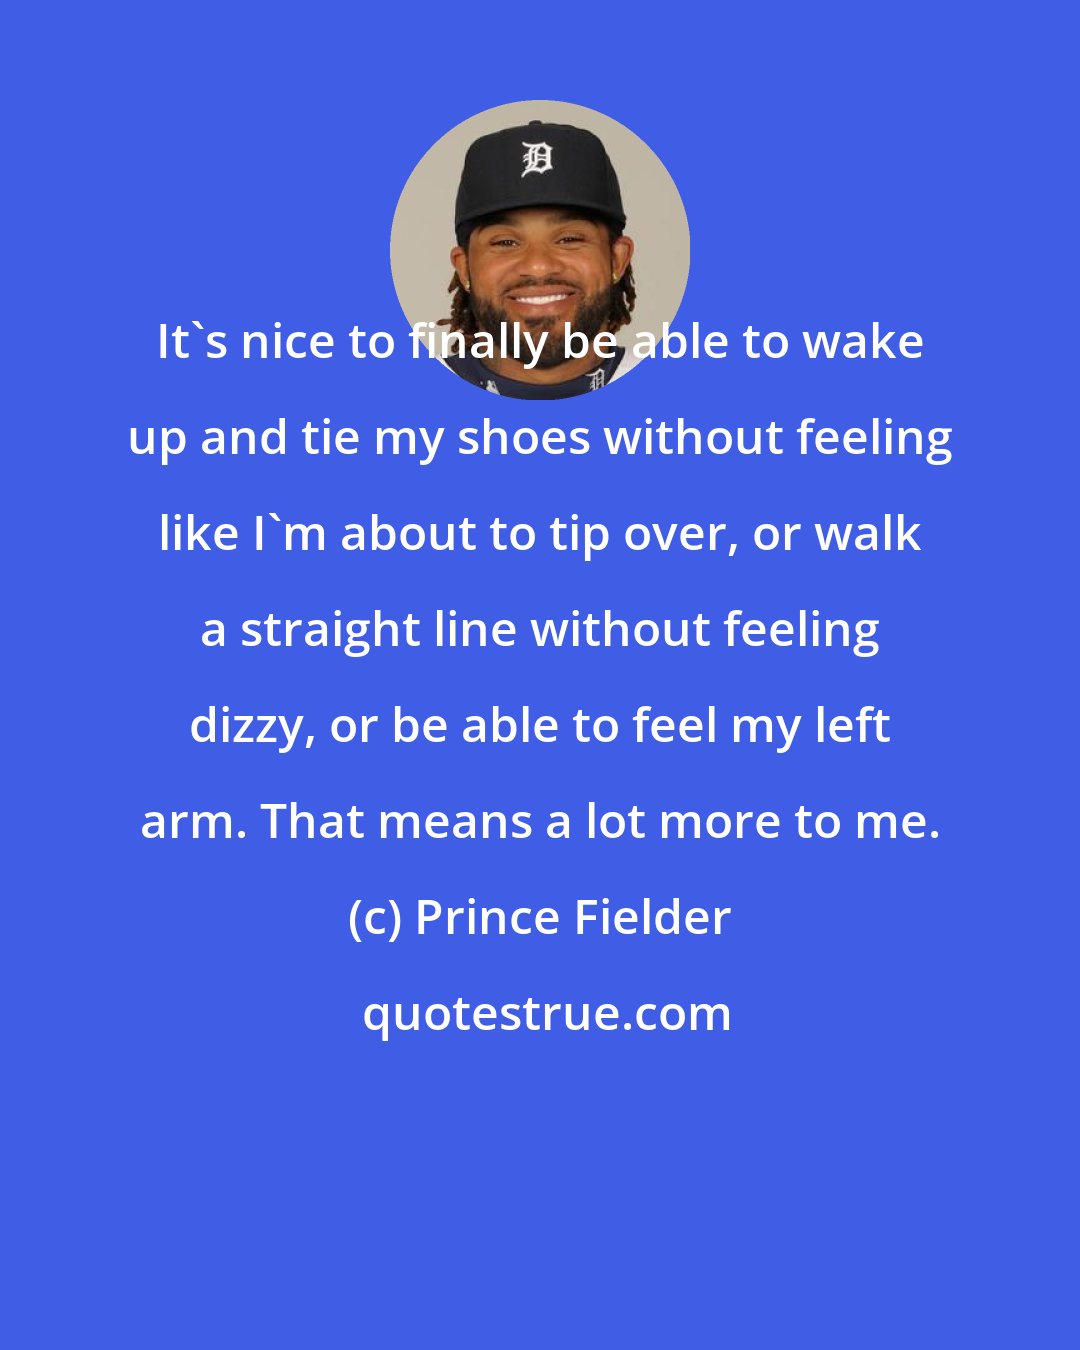 Prince Fielder: It's nice to finally be able to wake up and tie my shoes without feeling like I'm about to tip over, or walk a straight line without feeling dizzy, or be able to feel my left arm. That means a lot more to me.